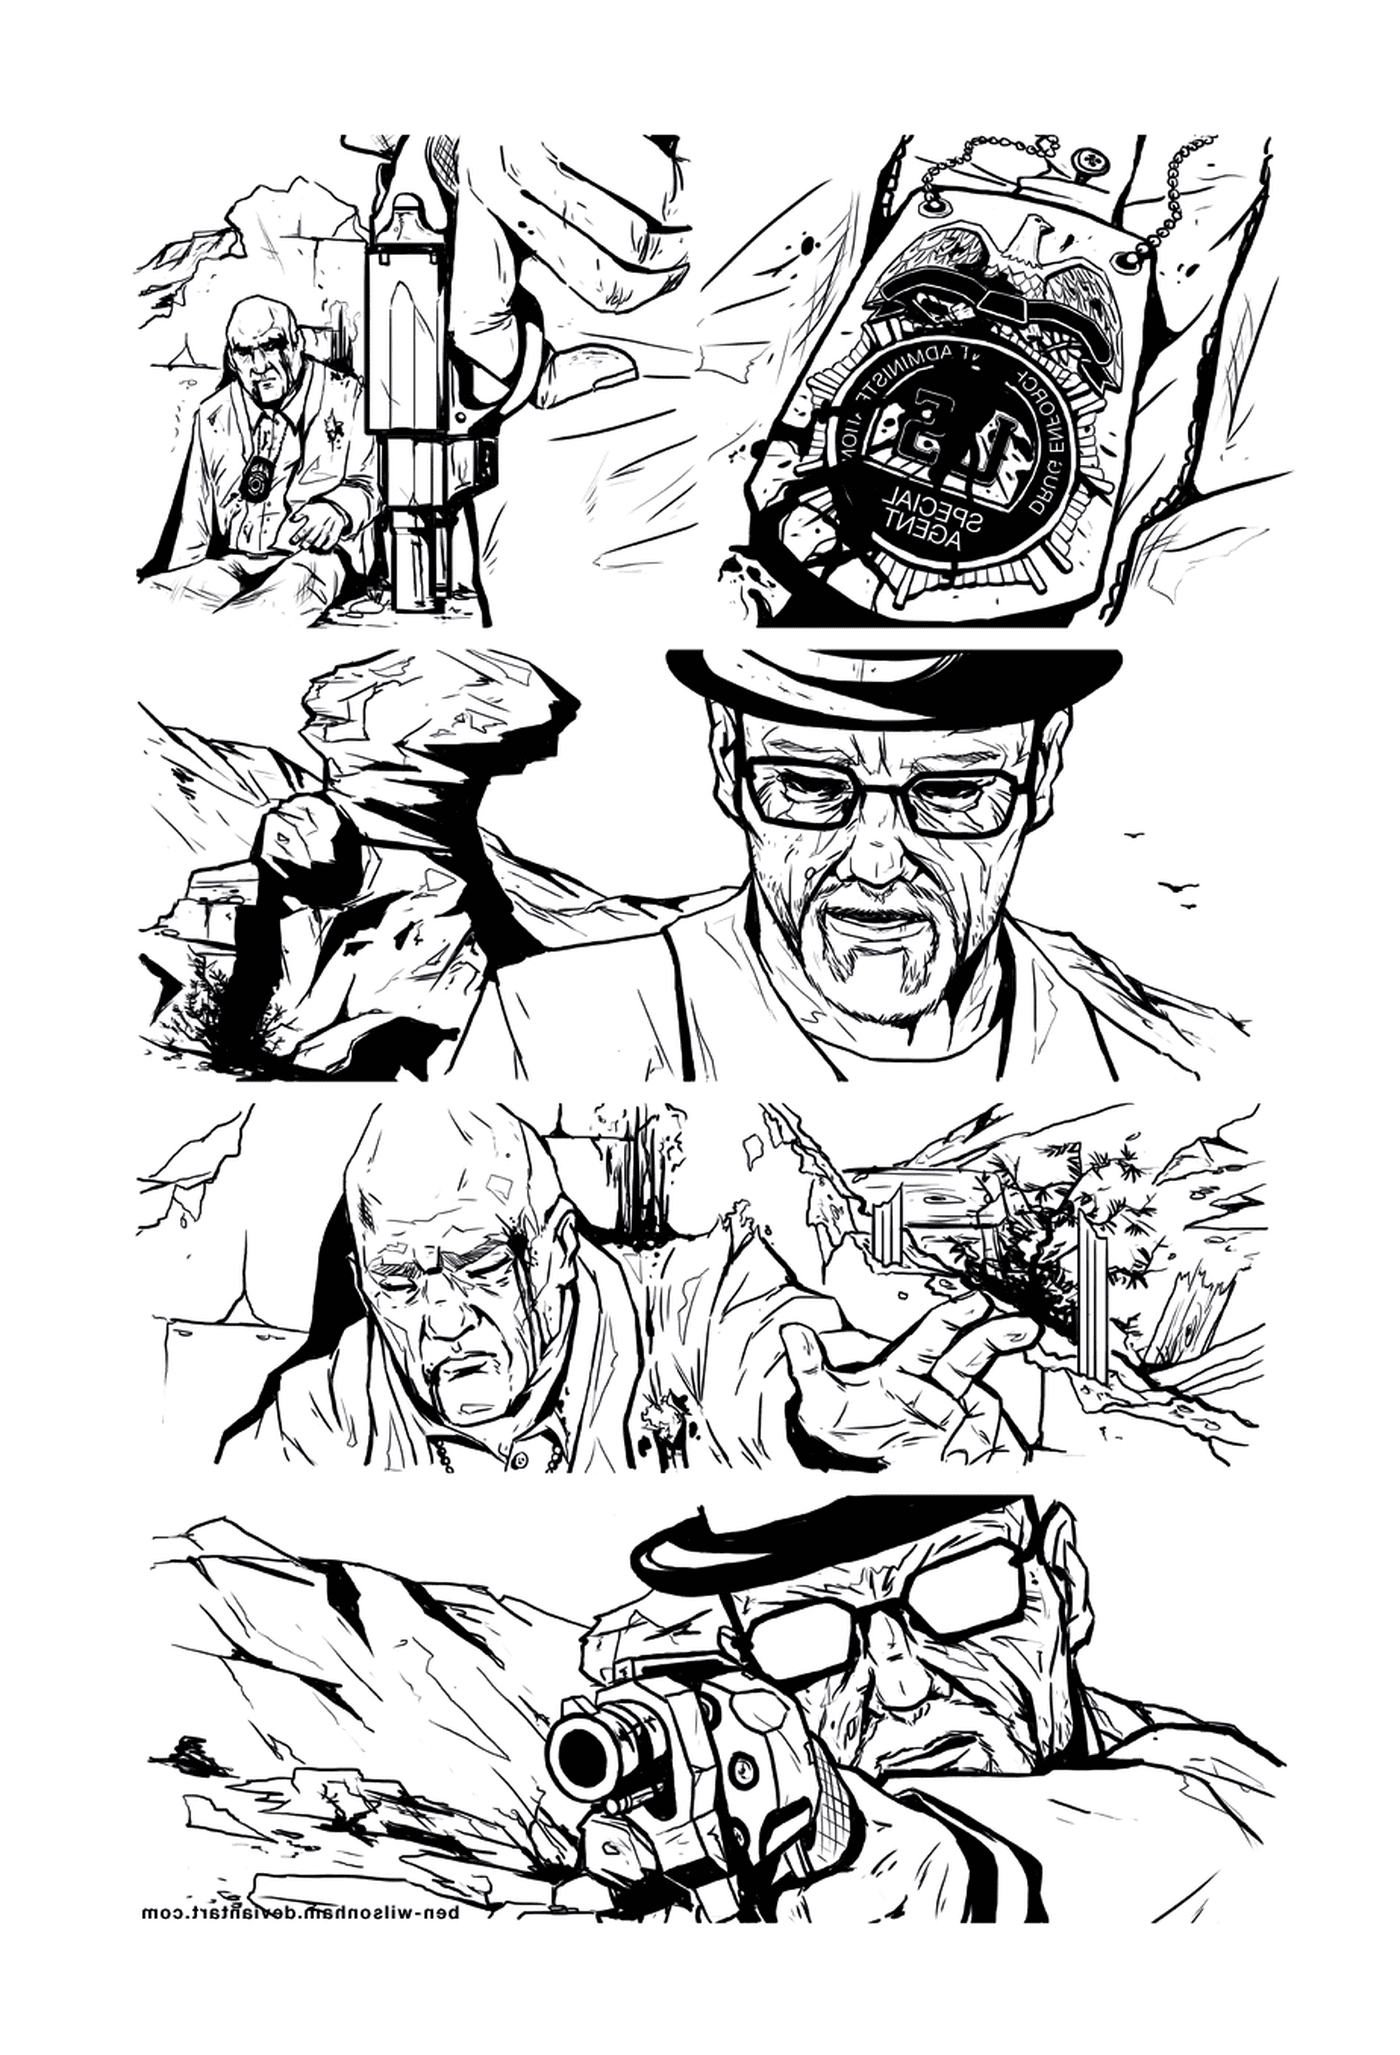  A series of black and white drawings of a man 